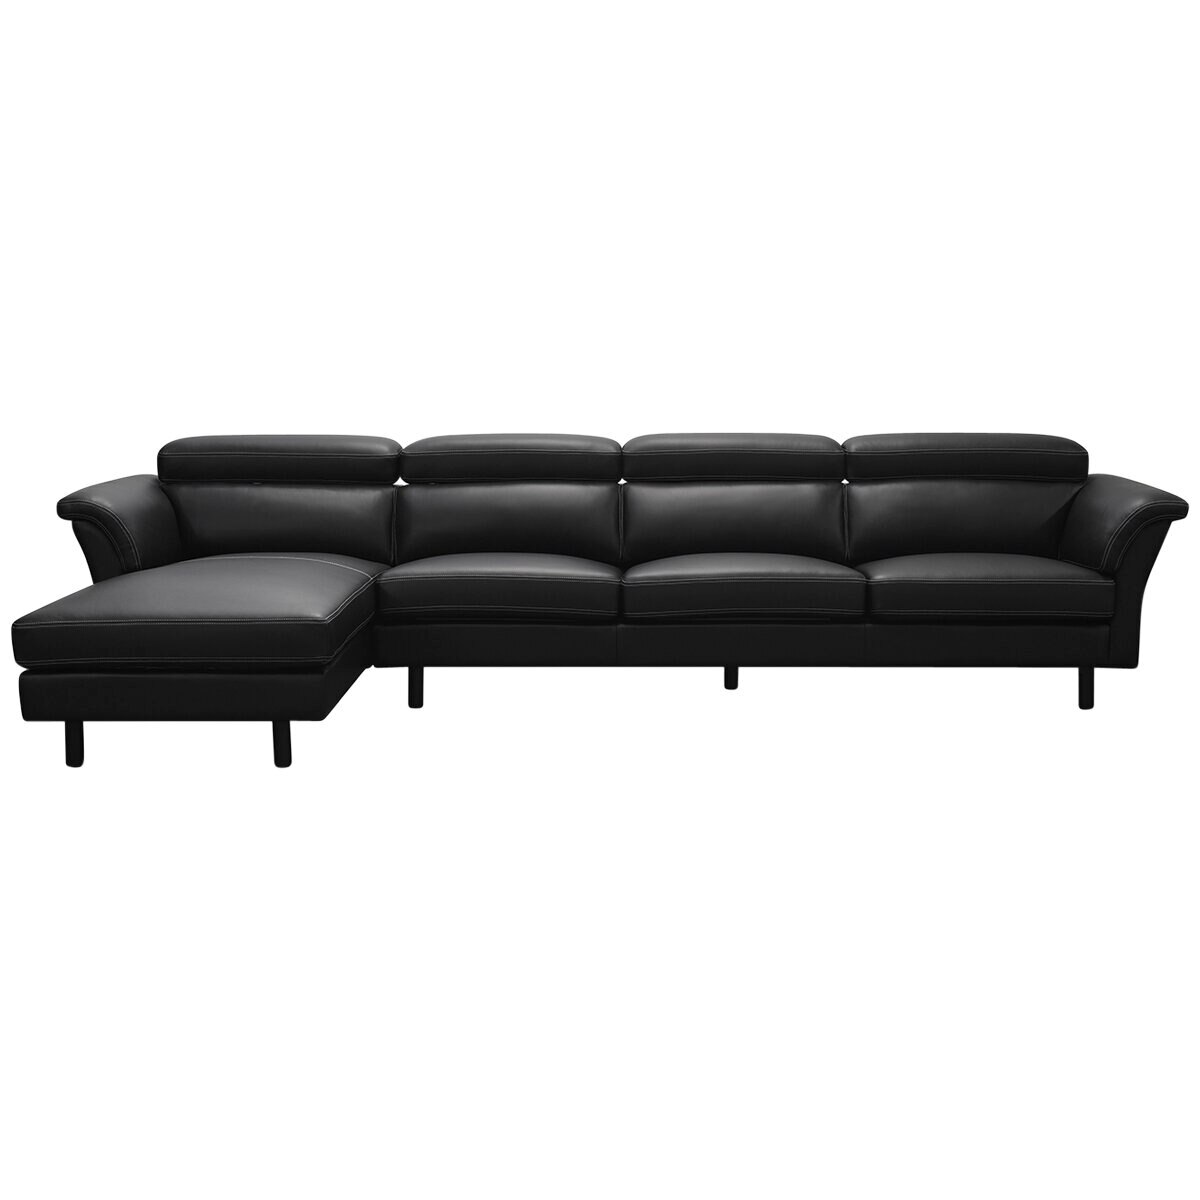 Moran Carson 3 Seat Sofa with Left Chaise